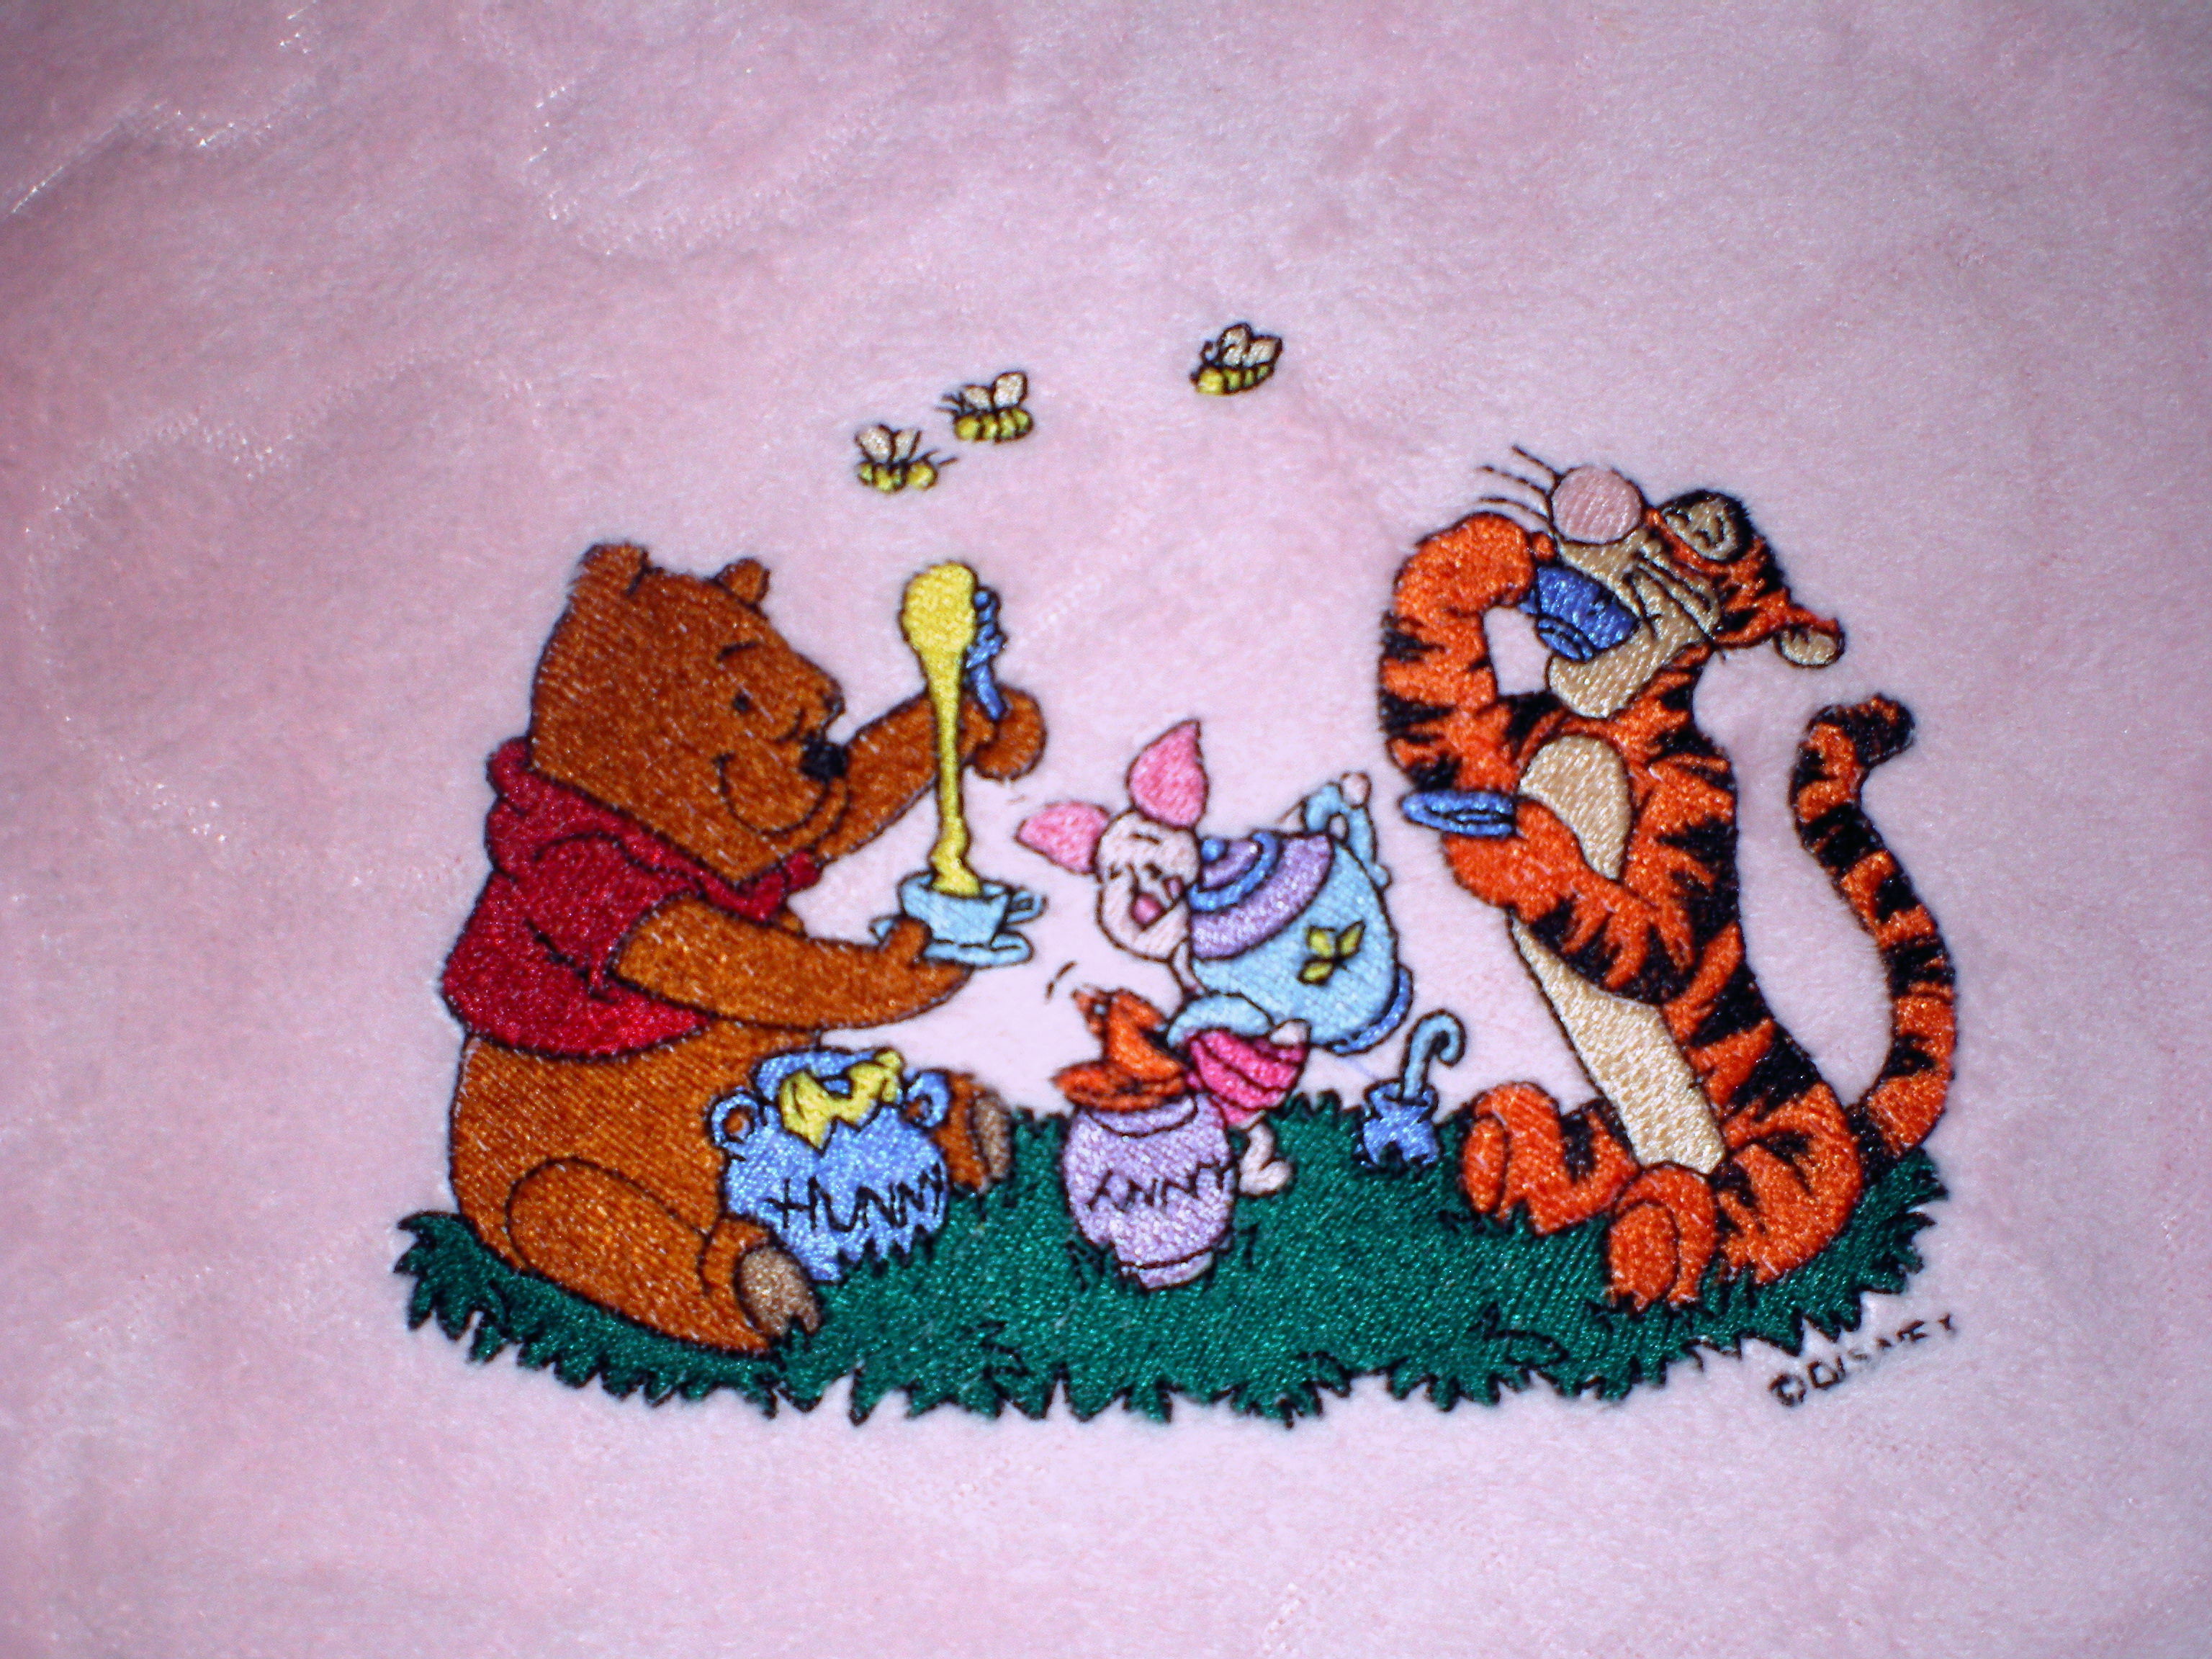 Free Machine Embroidery Patterns Brother Free Embroidery Designs Cute Embroidery Designs